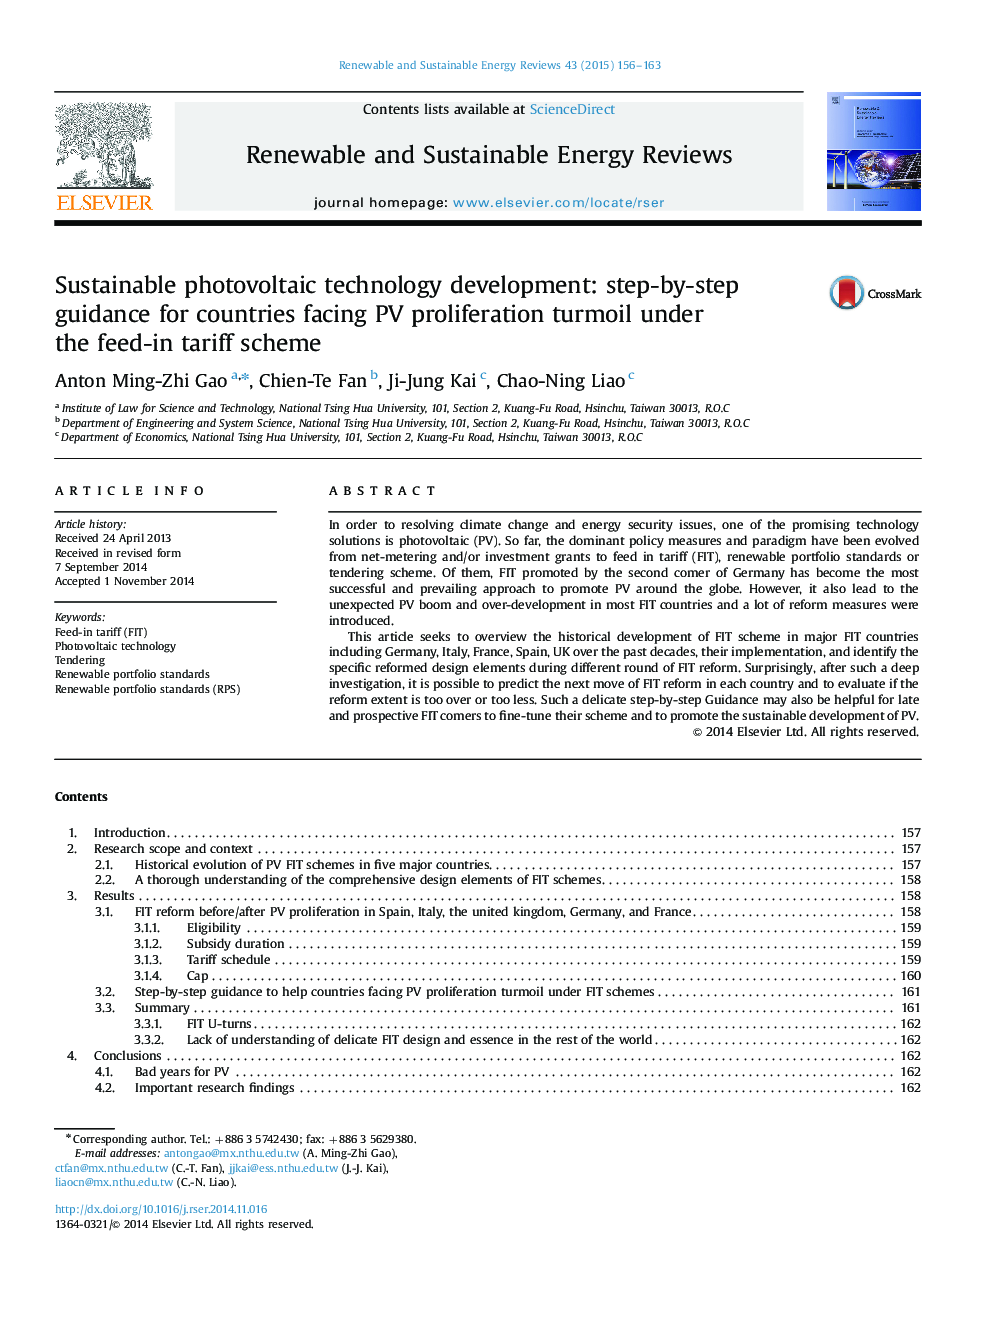 Sustainable photovoltaic technology development: step-by-step guidance for countries facing PV proliferation turmoil under the feed-in tariff scheme